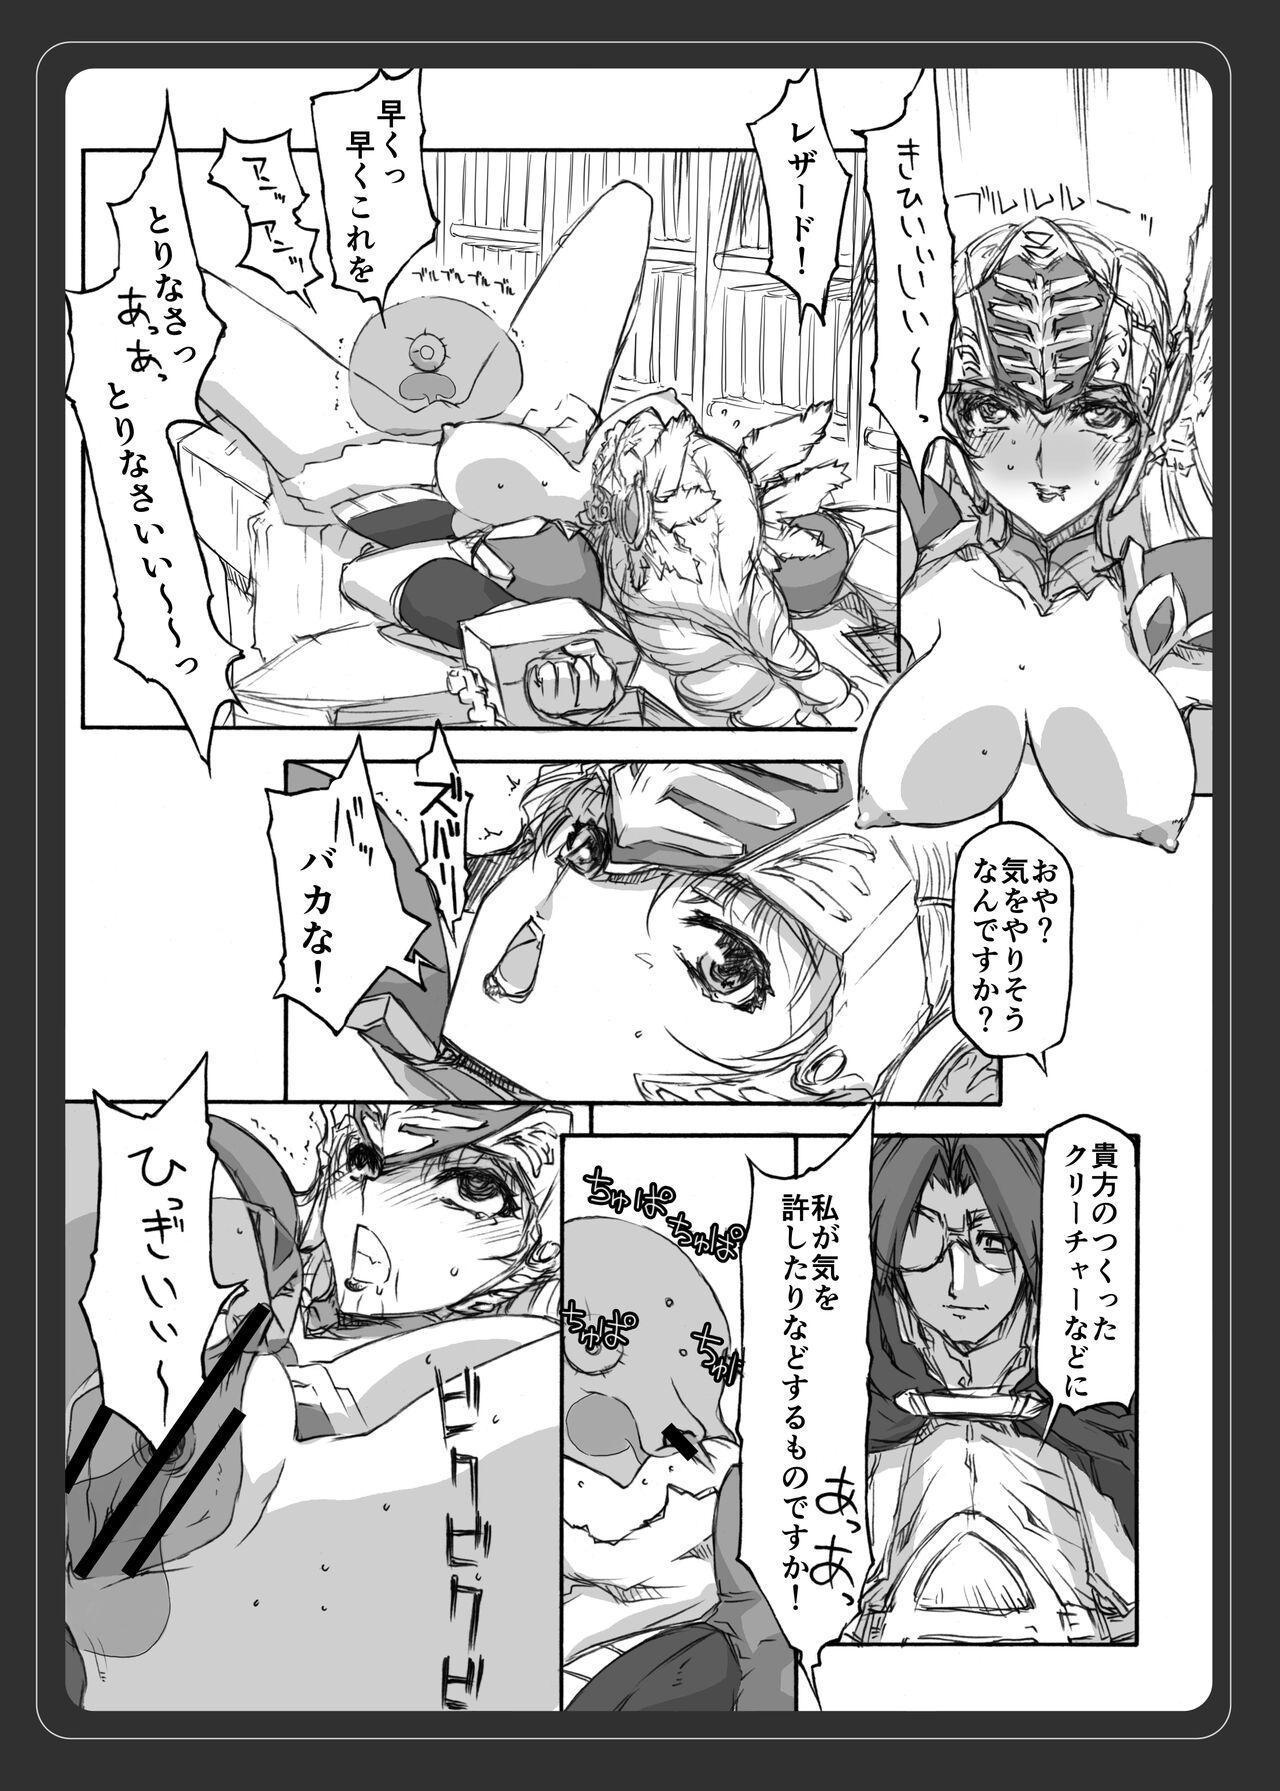 Teen Blowjob VALKYRIE PROFILE in BABEL RE 2 - Valkyrie profile Sharing - Page 11